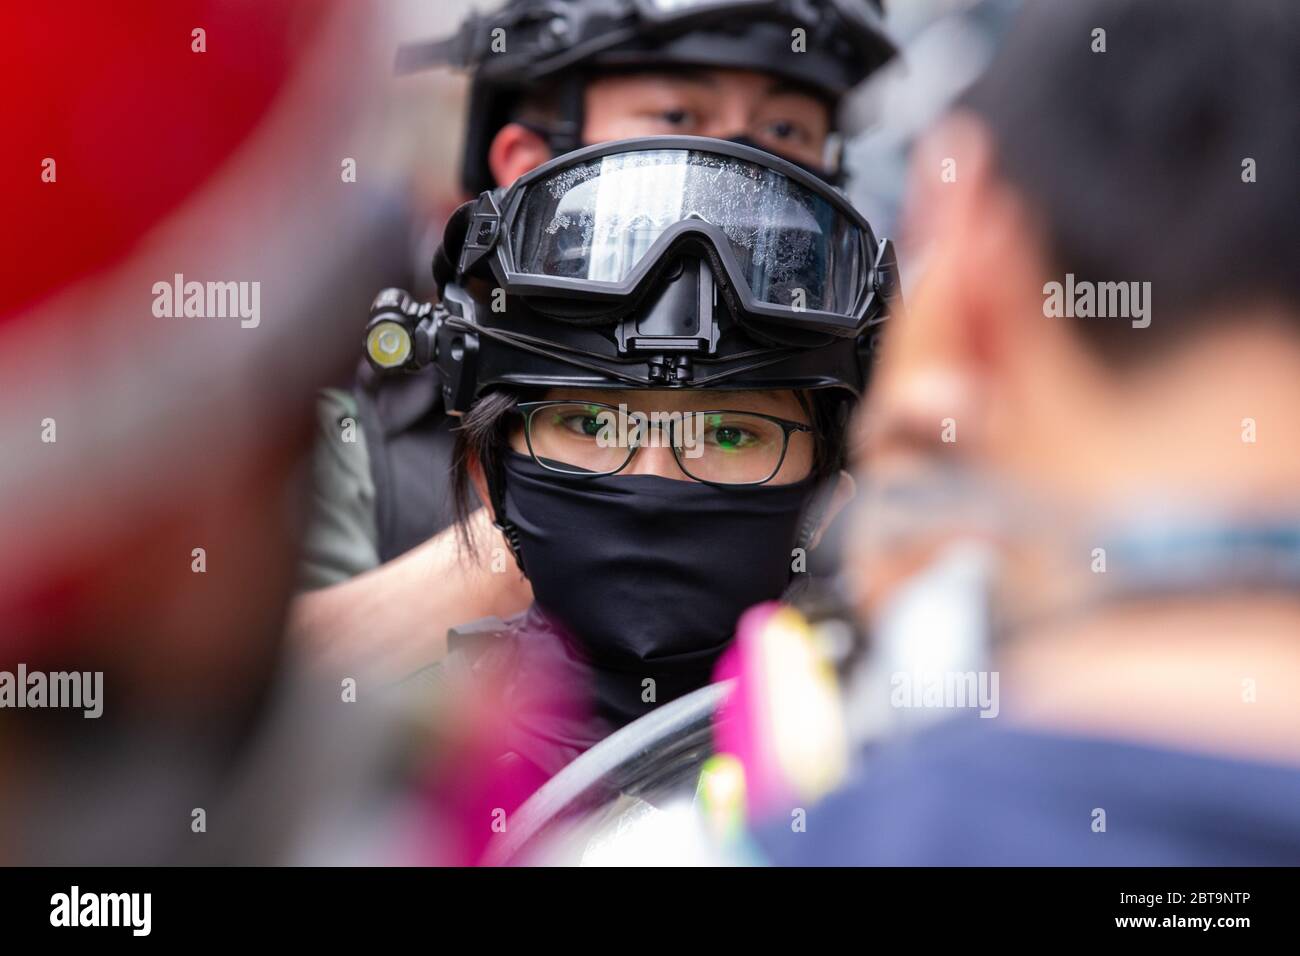 Hong Kong, 24th May 2020. Female HK Police Officer watching the crowd..Credit: David Ogg / Alamy Live News Stock Photo